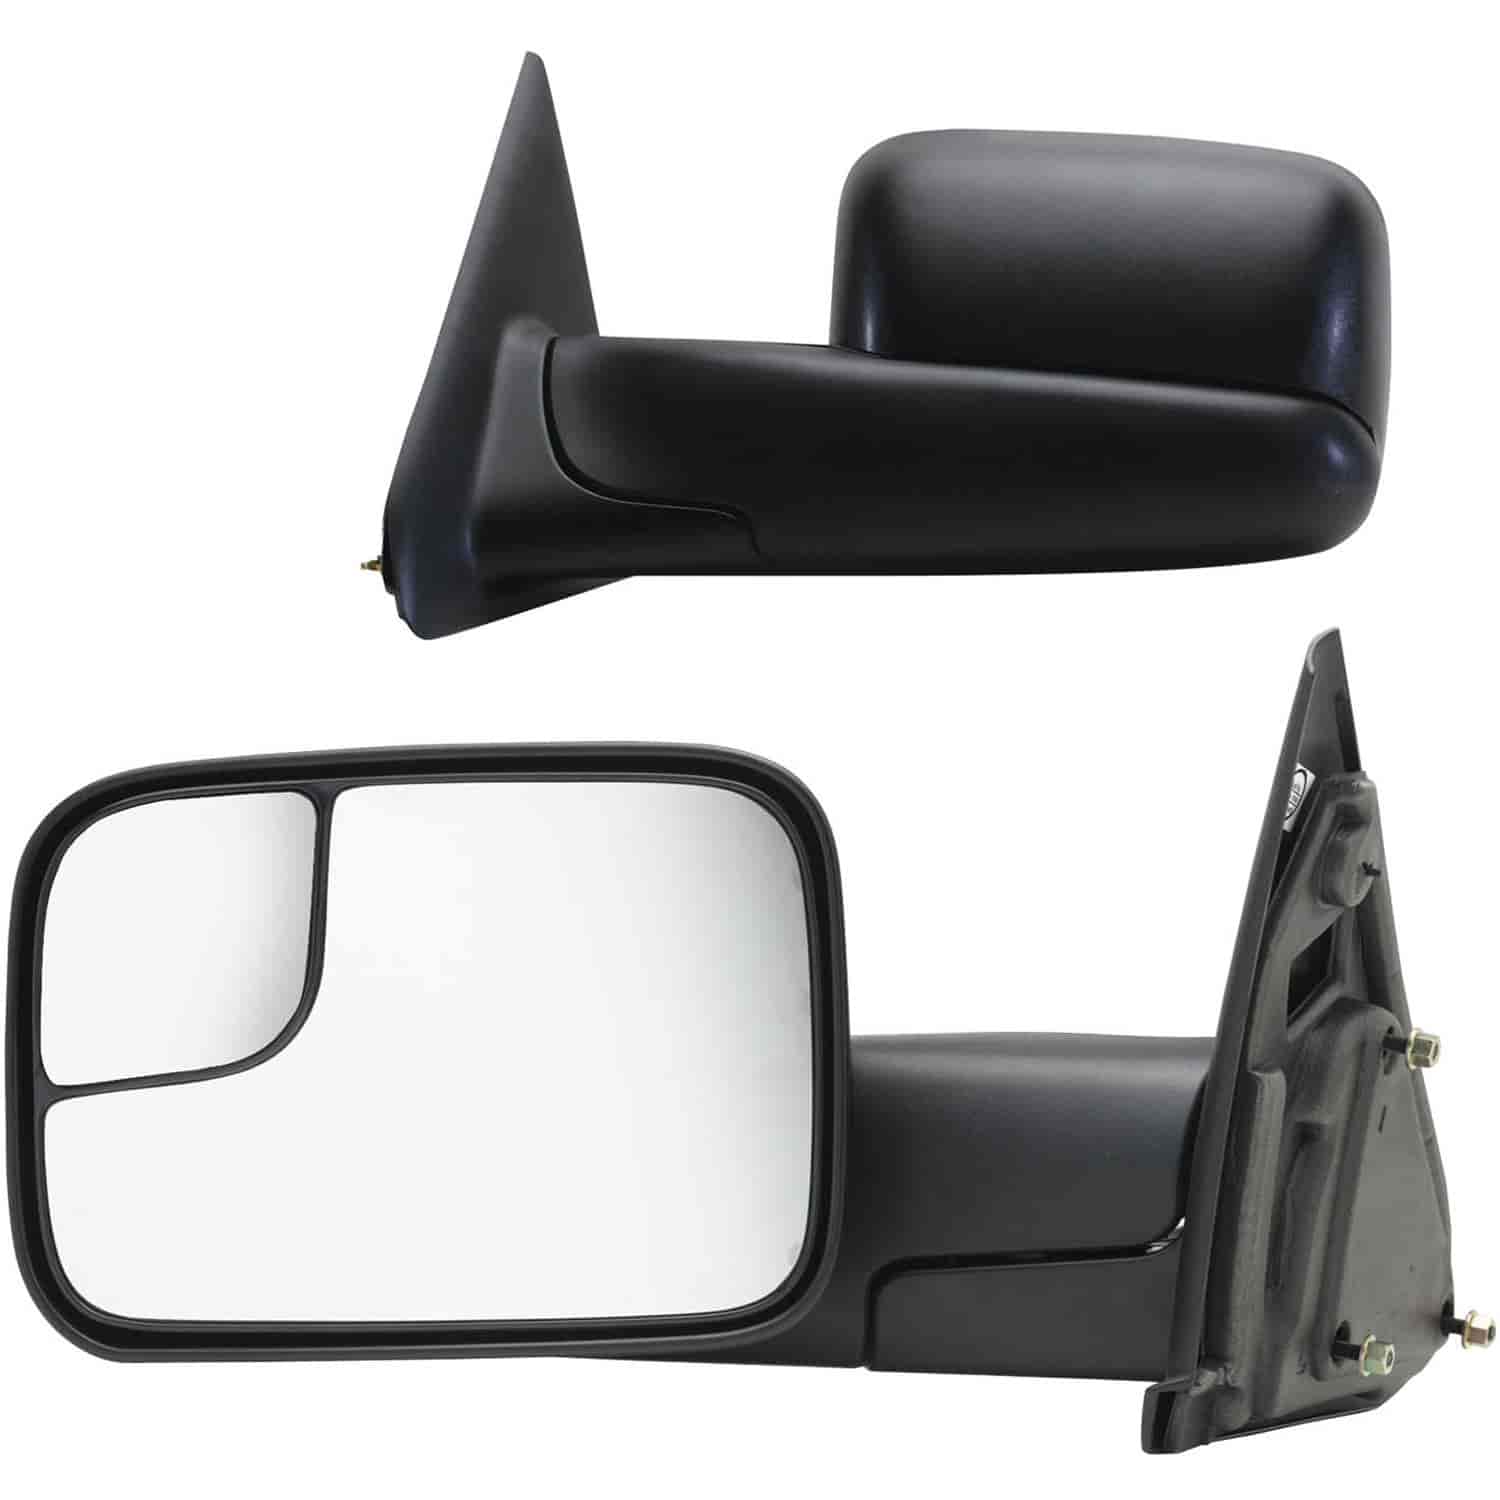 OEM Style Replacement mirror set for 02-08 1500 03-09 2500/3500 Dodge Ram Pick-Up w/towing pkg spot